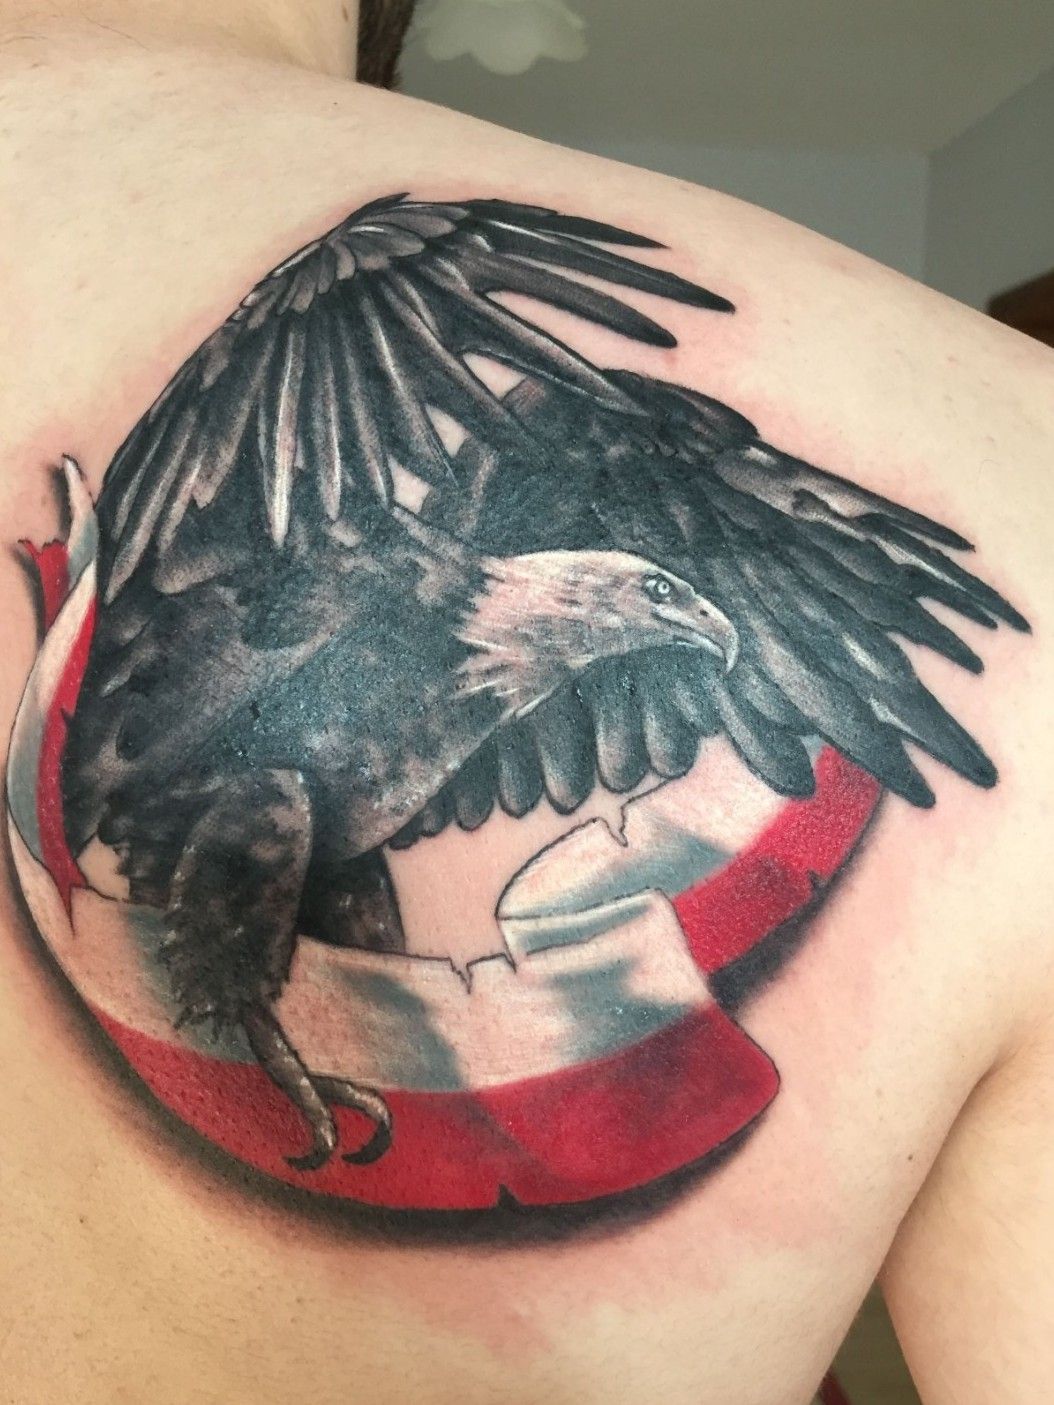 I want to use the Polish Eagle for my second tattoo but also plan to have a  pirate ship scene done Would it be better to have this on my peck and